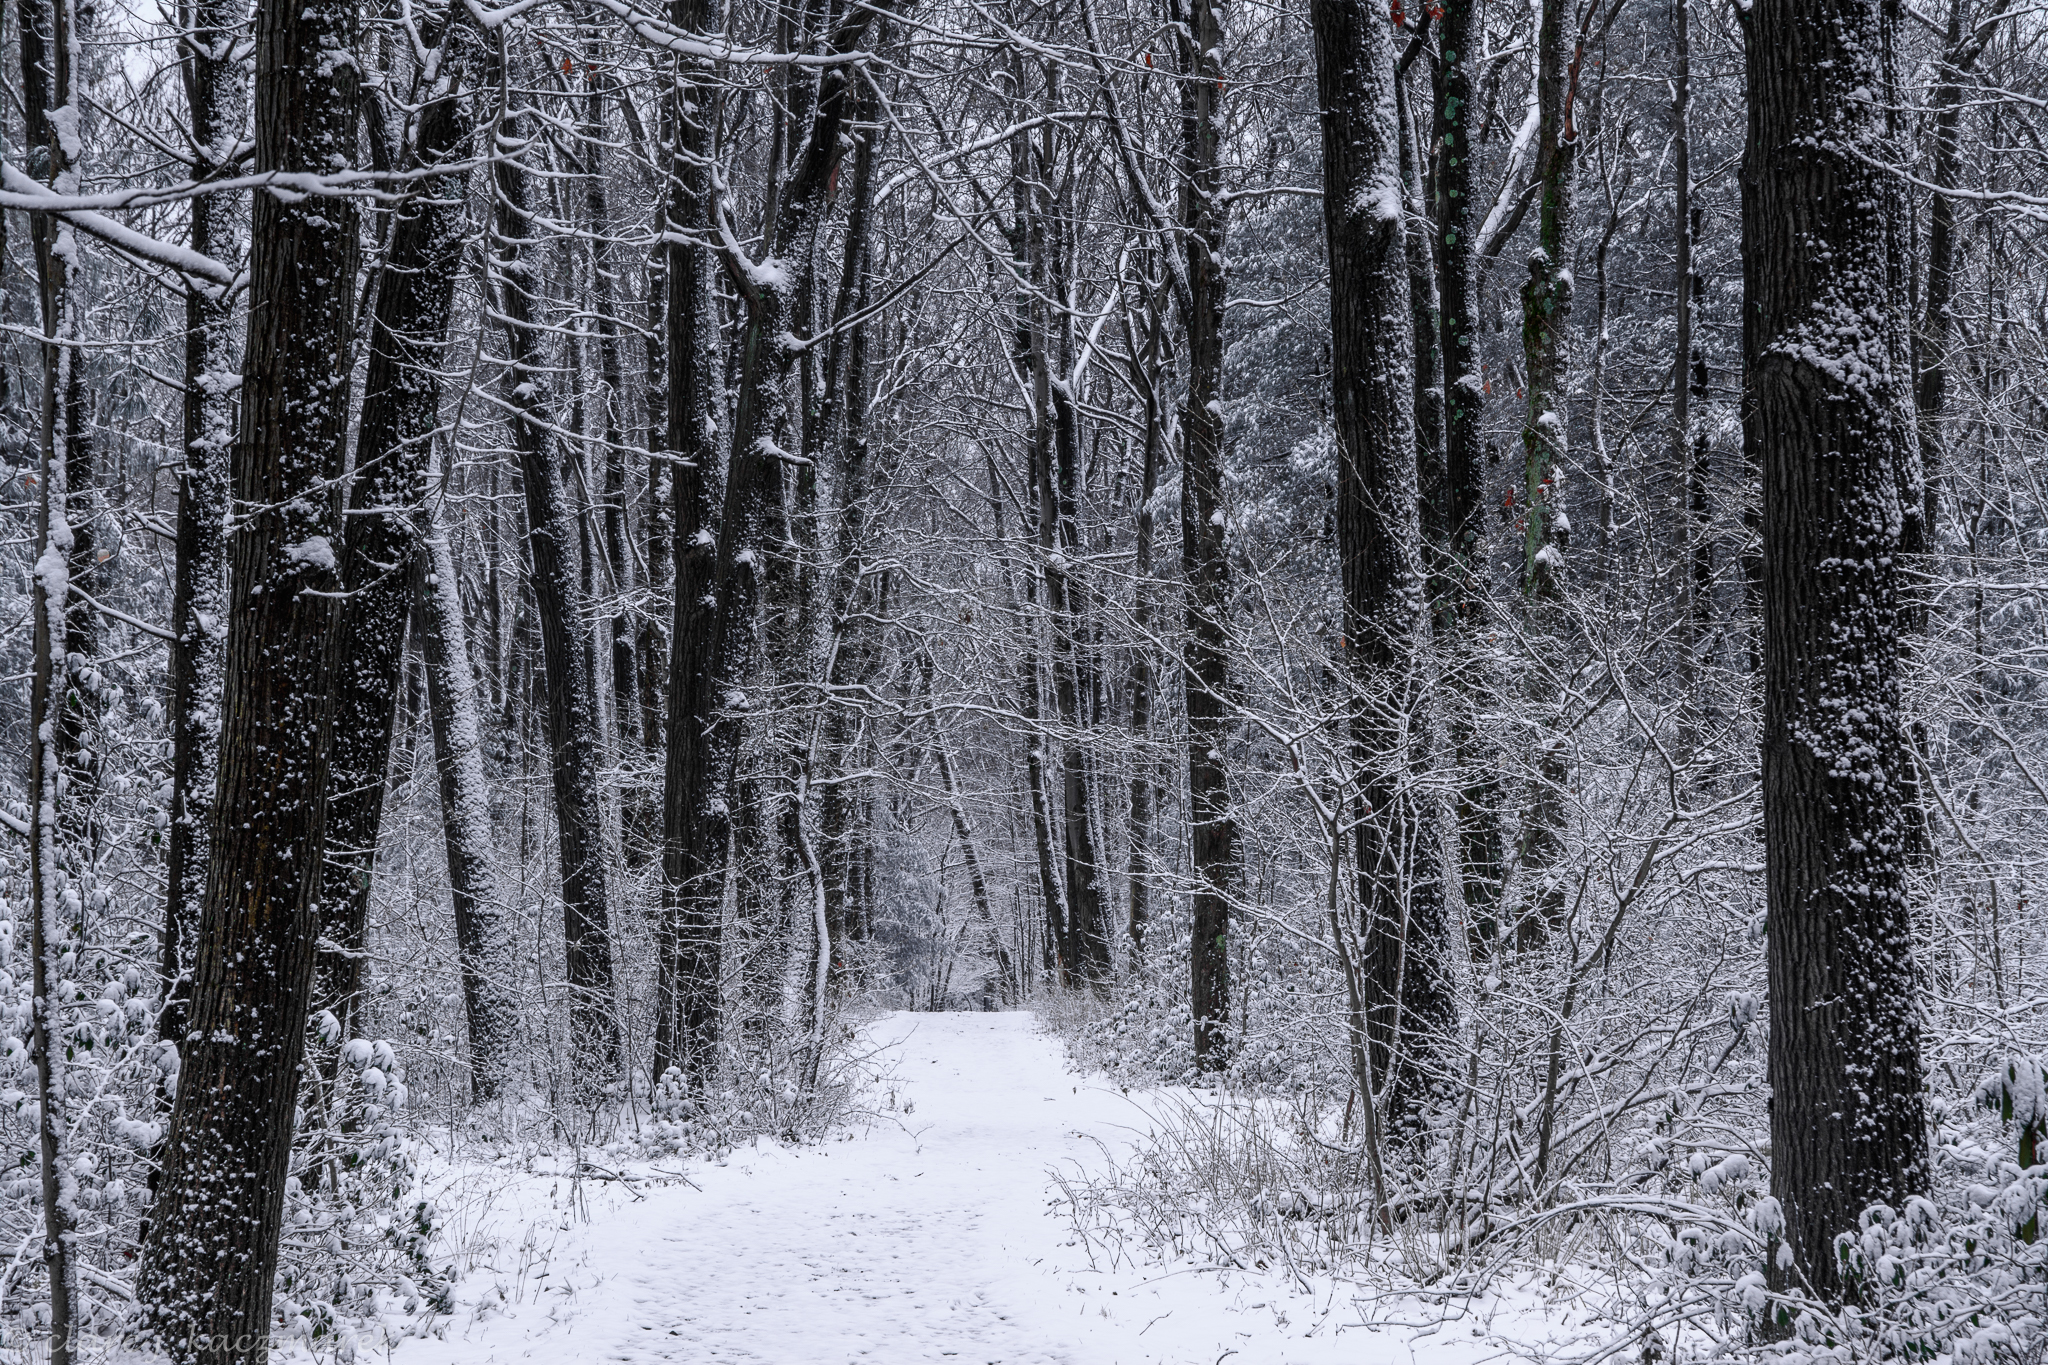 A winter woodland scene of snow covered trees